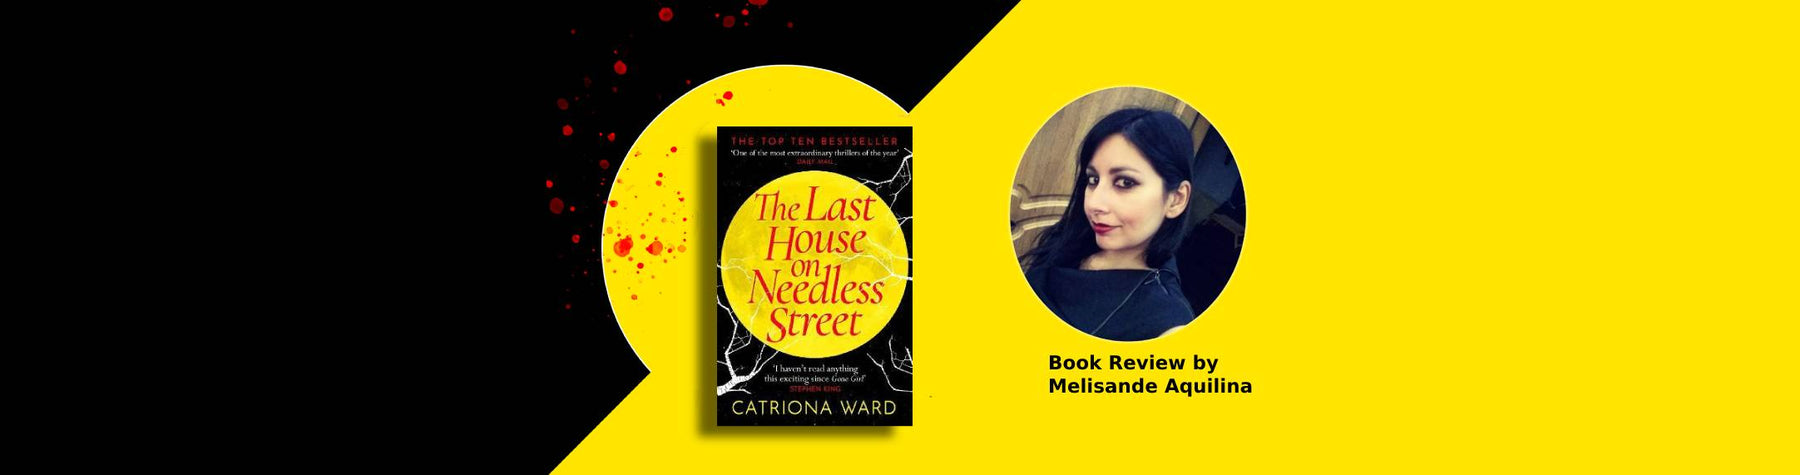 "It’s a unique masterpiece of suspense"  The Last House on Needless Street book review by Melisande Aquilina